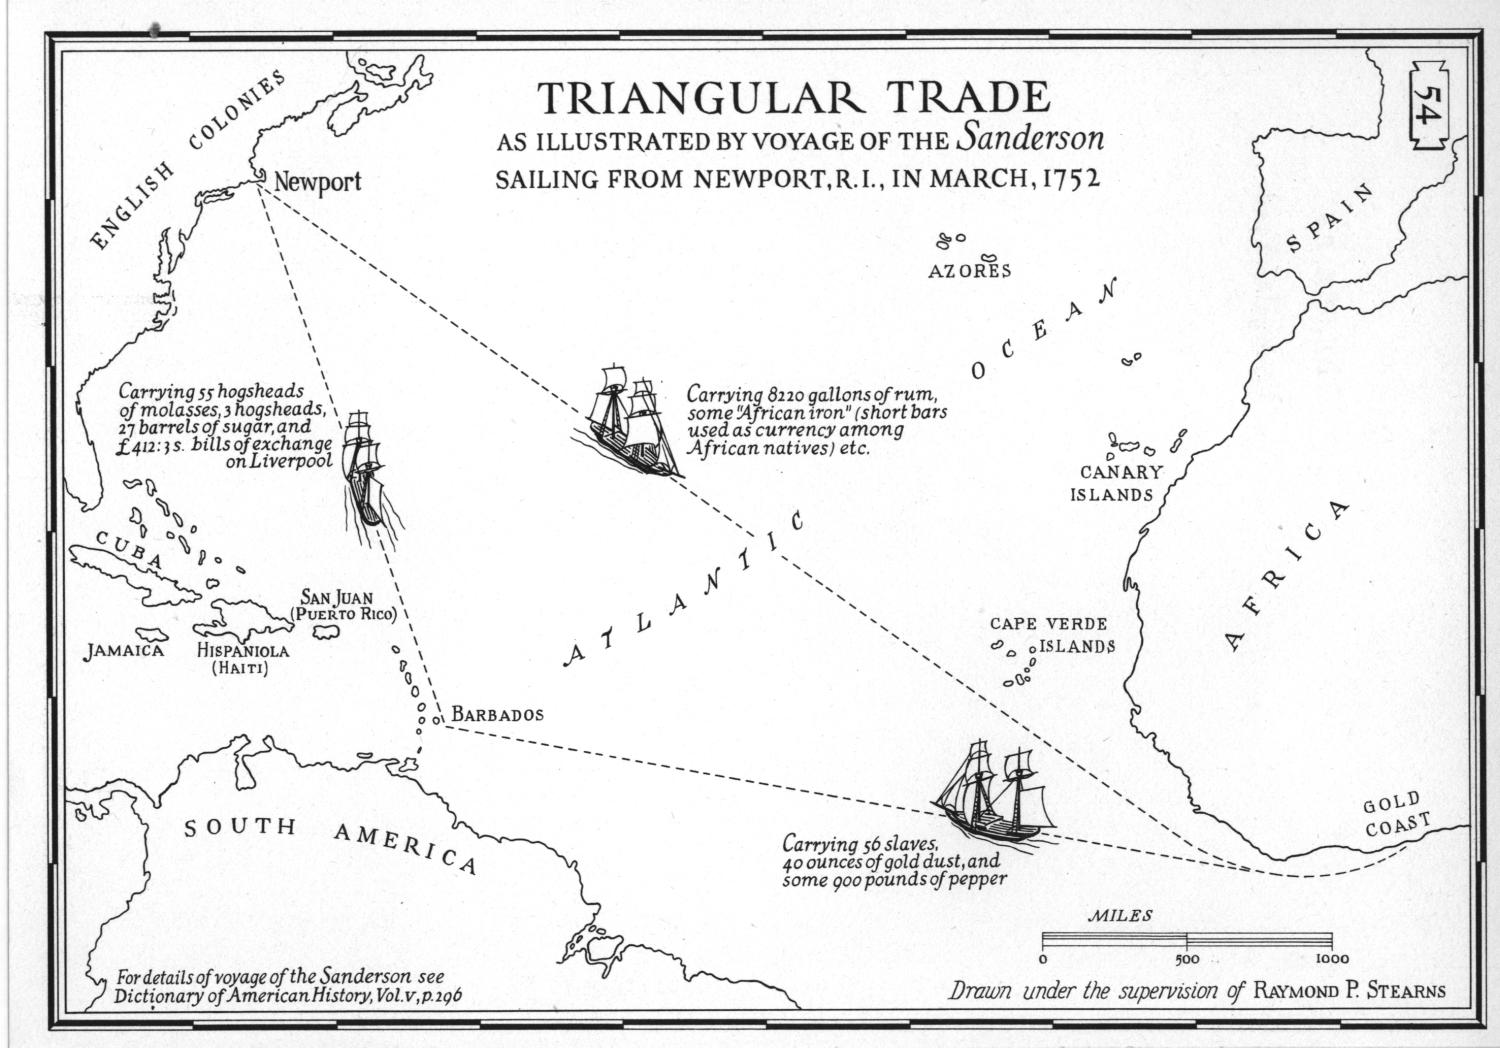 describe the effects of the triangular trade system